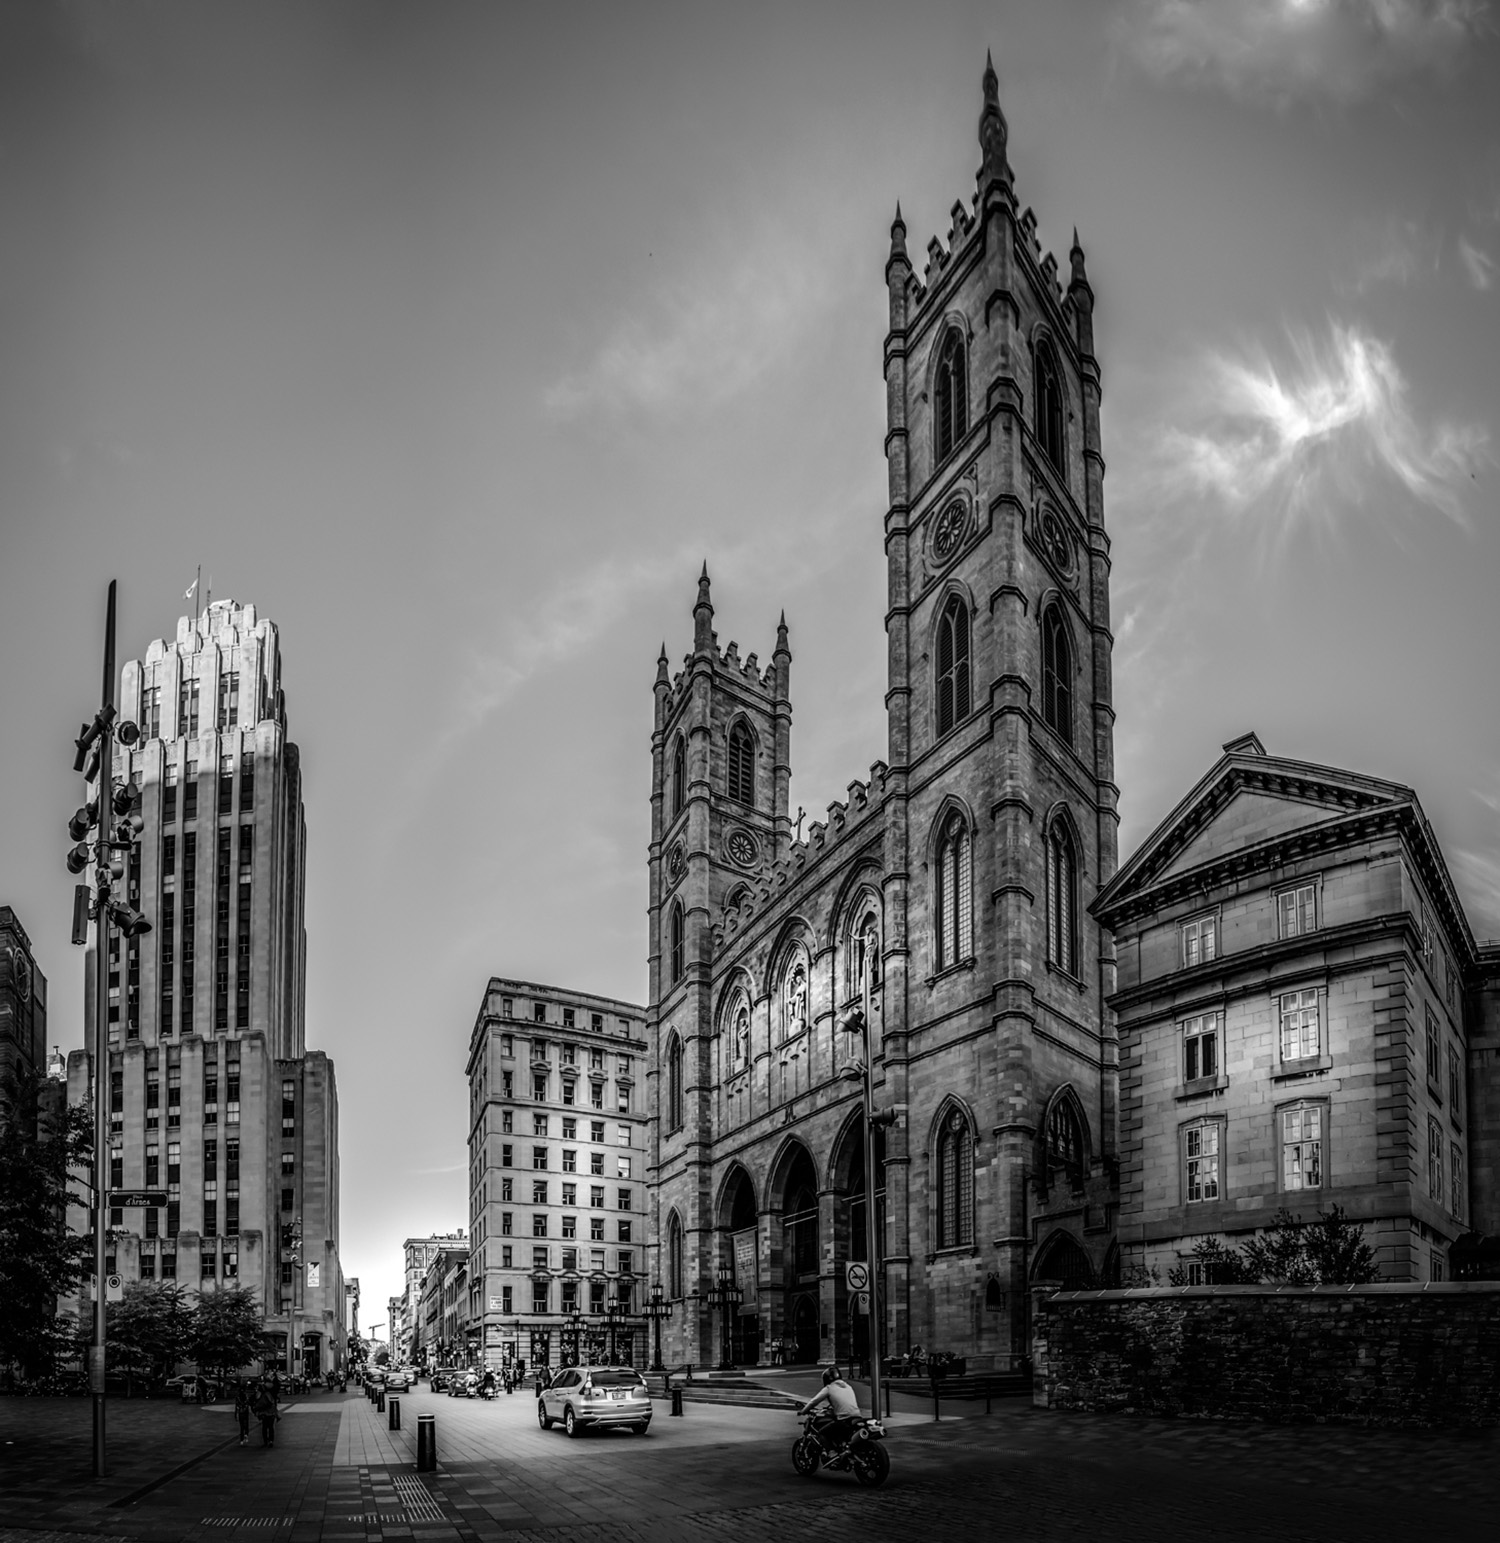 Montreal in Black & White